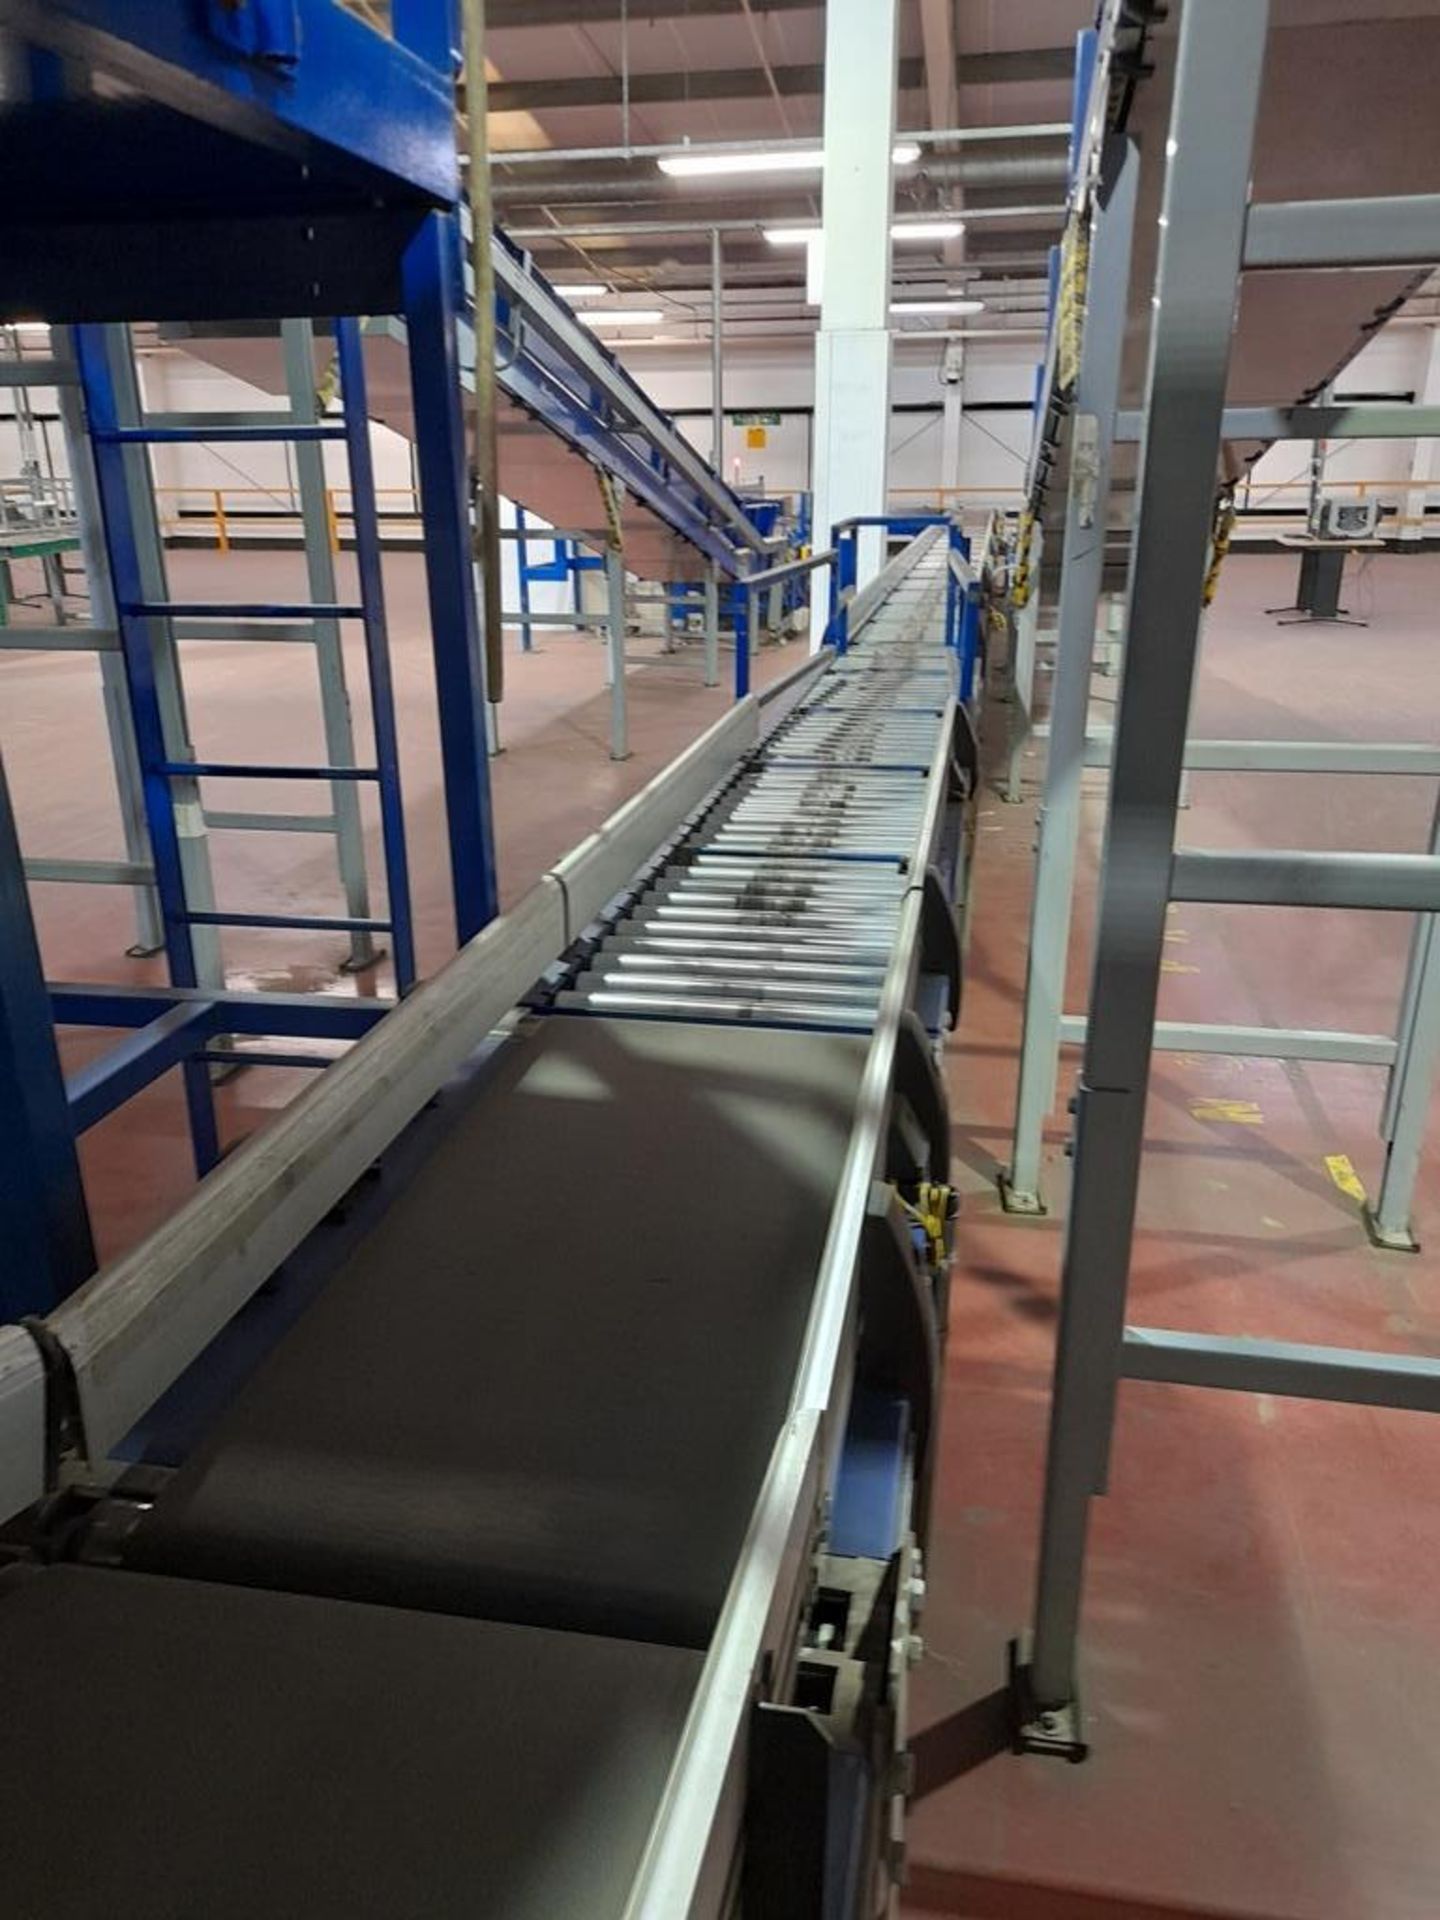 Unloading and data catchment: Line 3 - Approx 12 various conveyors, belt & roller, straight, angled, - Image 10 of 16